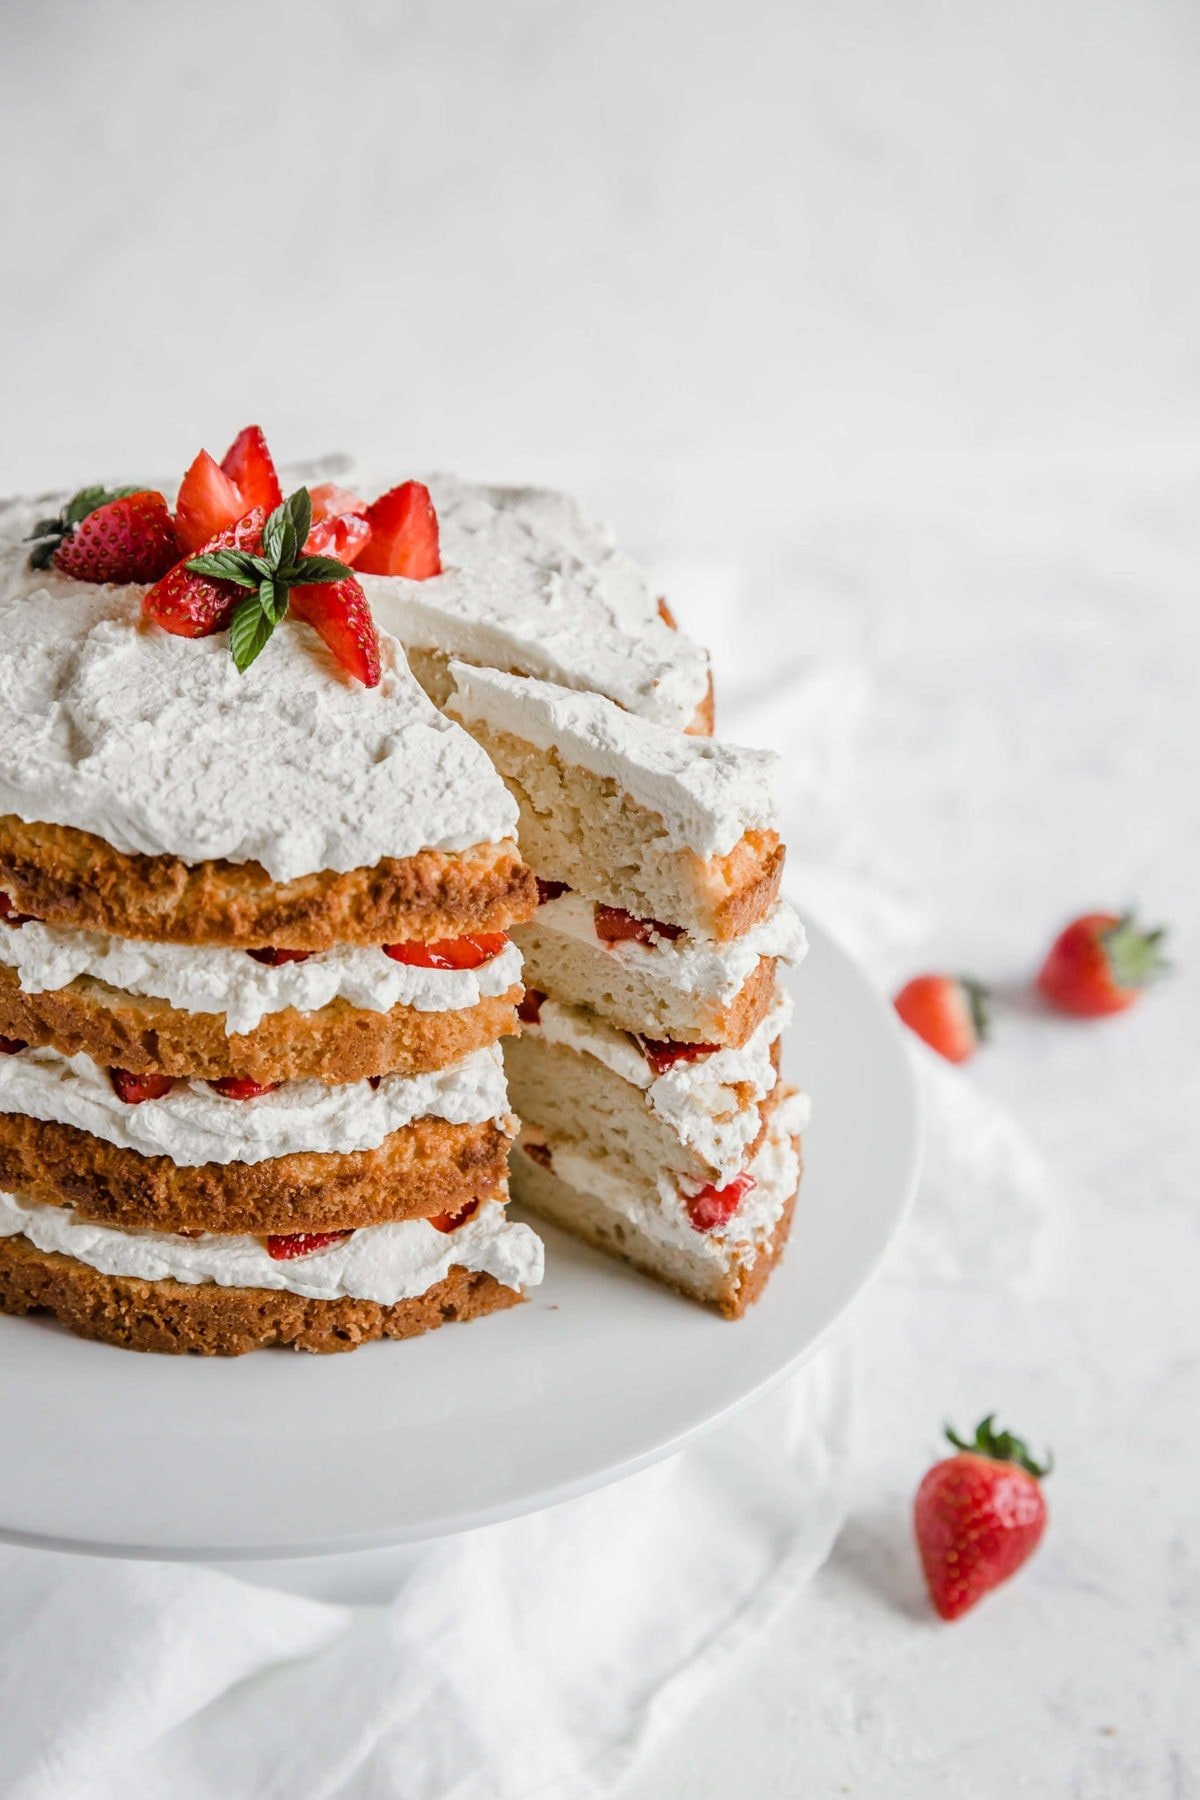 This Keto Strawberry Shortcake is the perfect spring and summer low carb dessert. With moist cake, fresh whipped cream and perfectly sweet strawberries, this is a perfectly balanced keto treat.